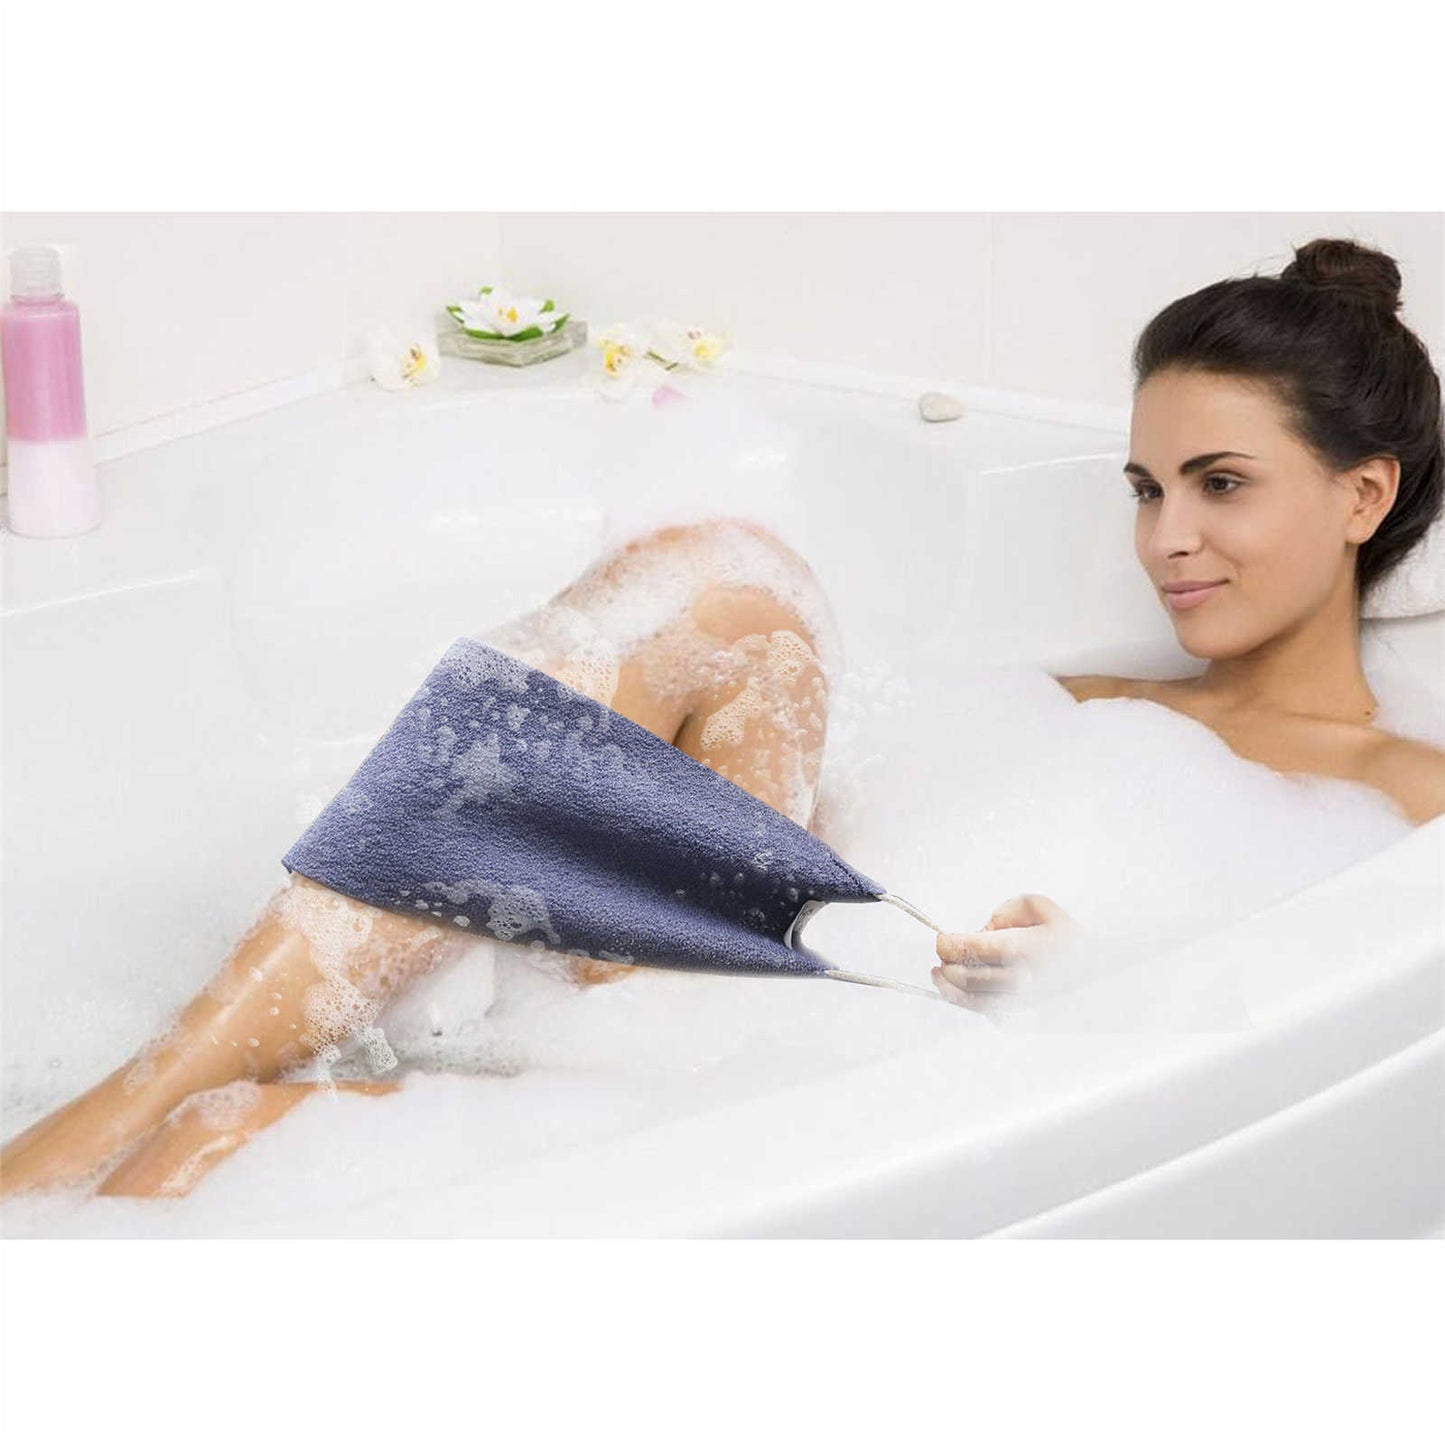 EvridWear Exfoliating Back Scrubber for Shower One Size (Blue)